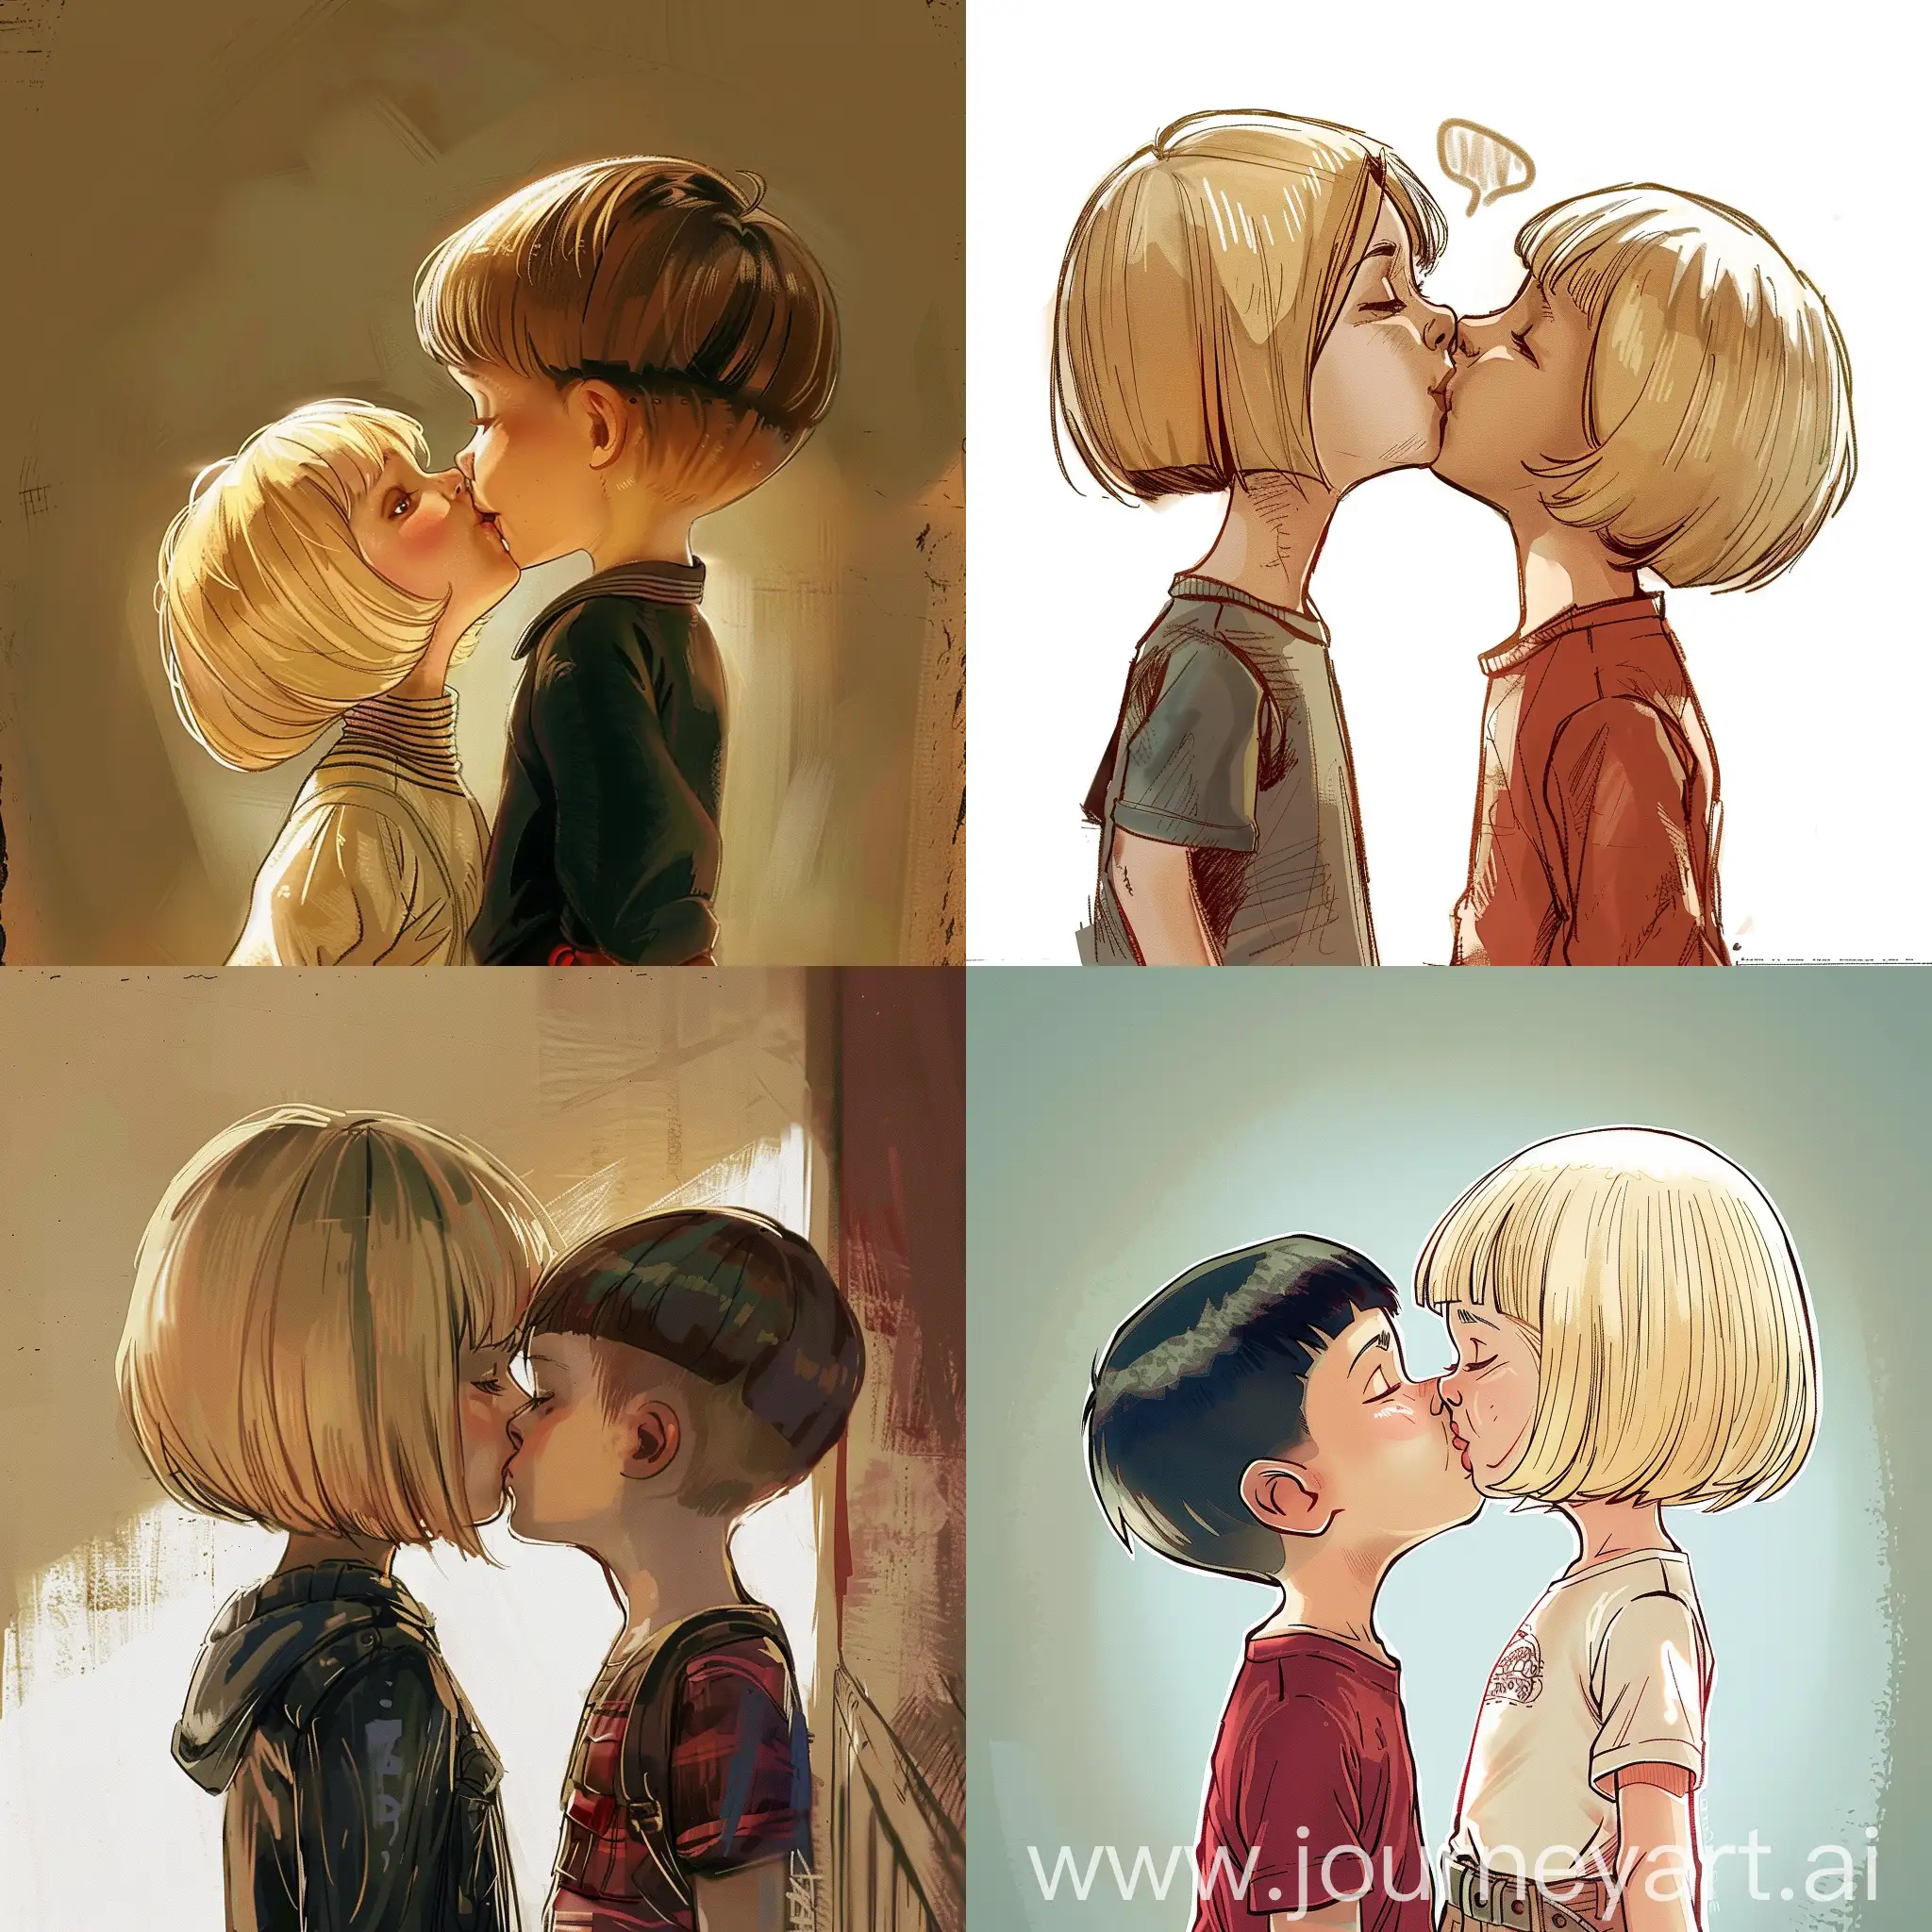 Blonde-Girl-with-Bob-Haircut-Kissing-Boy-in-Romantic-Embrace